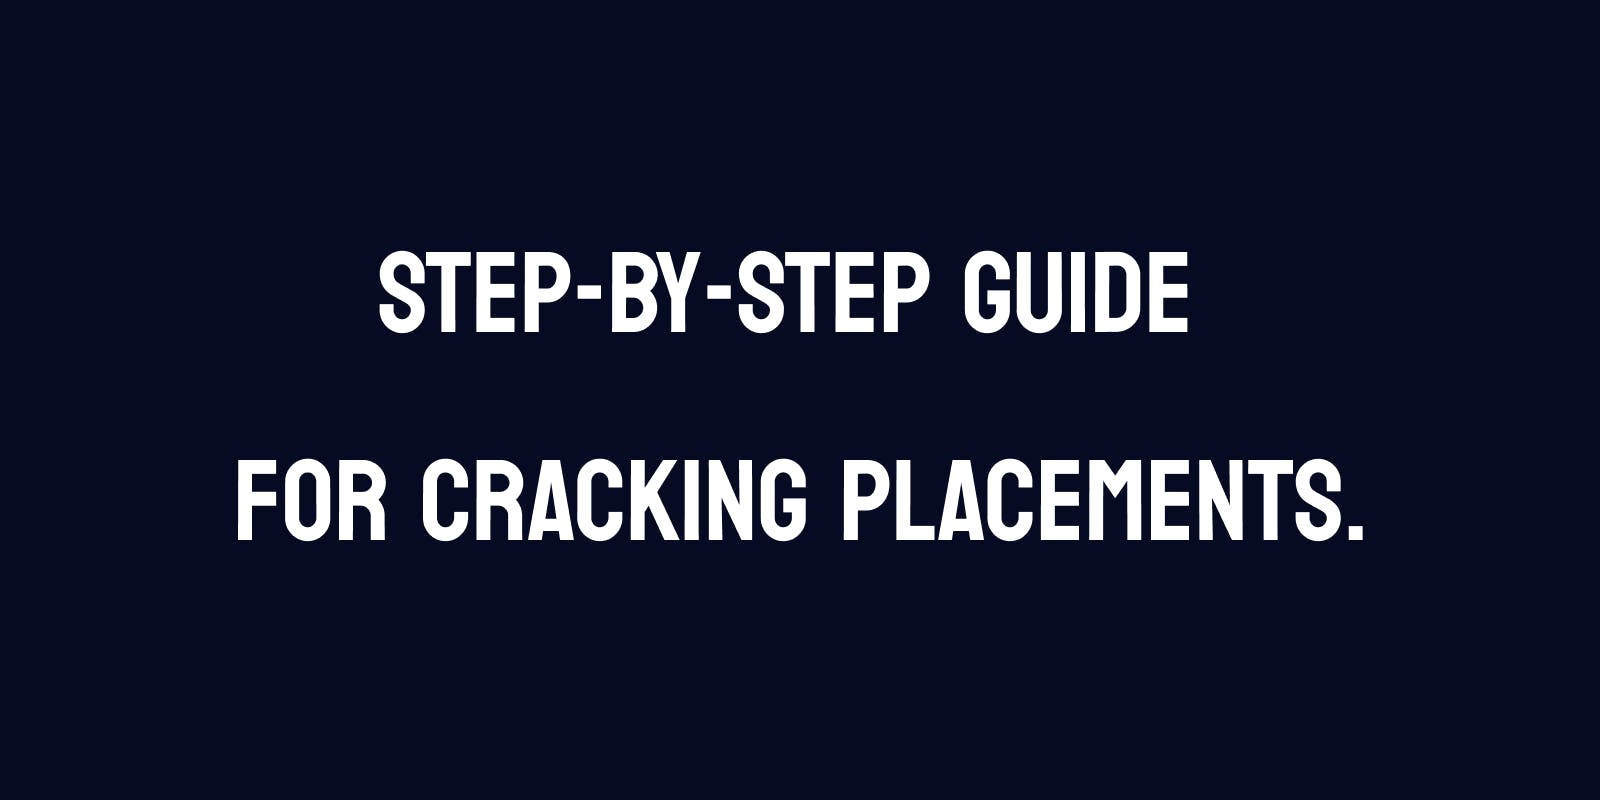 Cracking Placements:  The Journey through Processes and Components